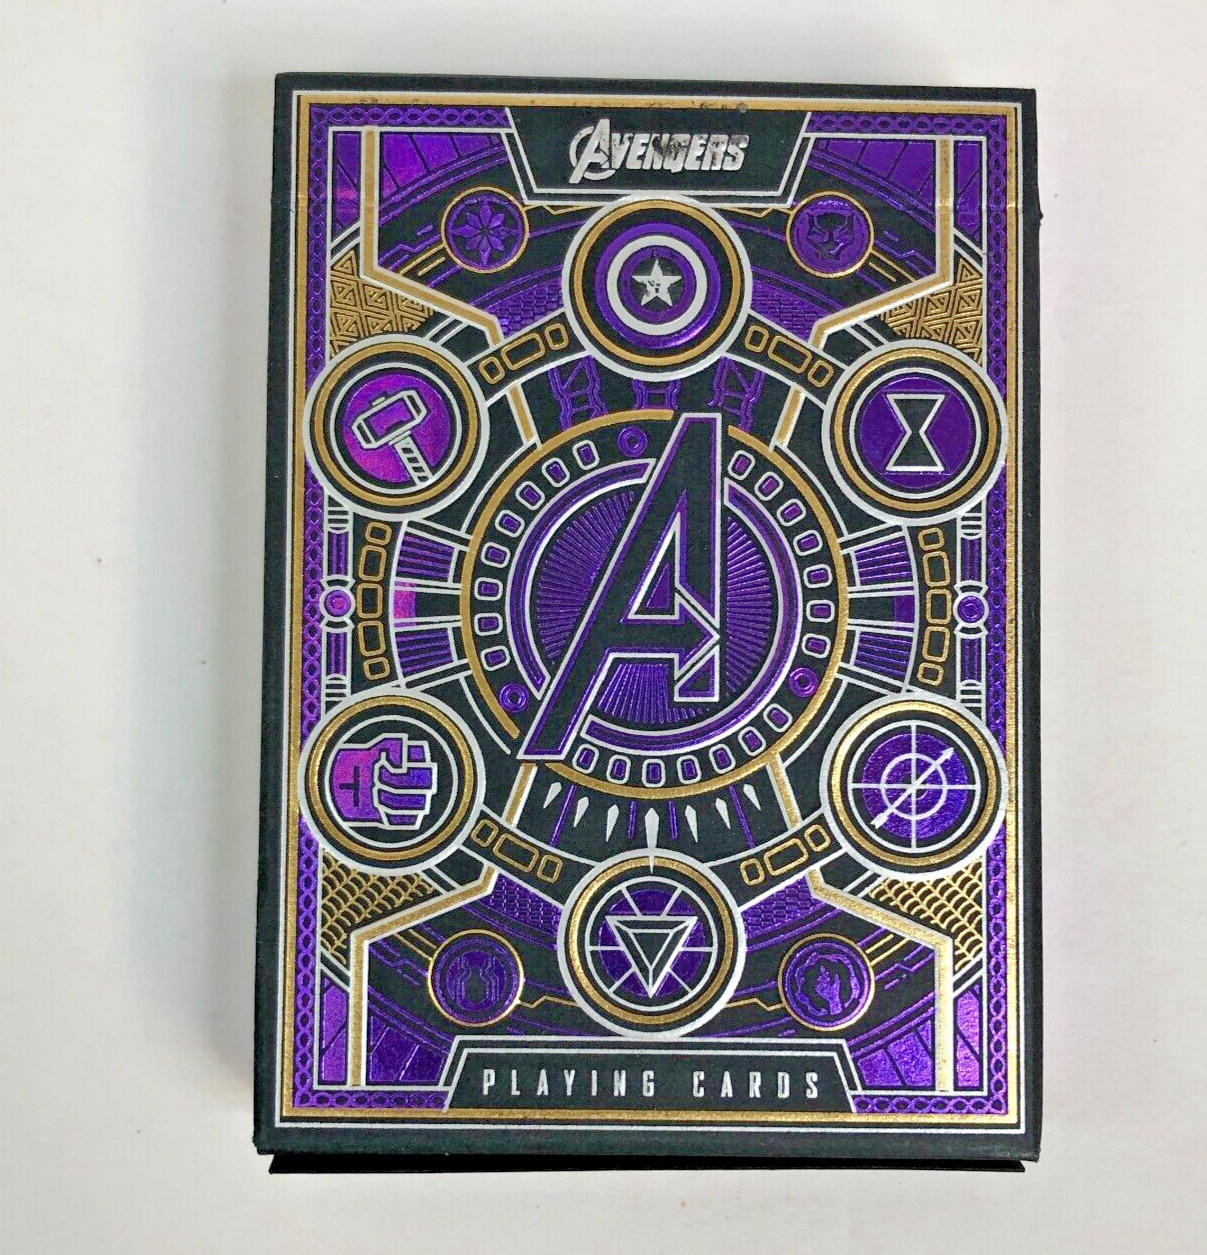 AVENGERS Playing Cards by Theory 11 COMPLETE